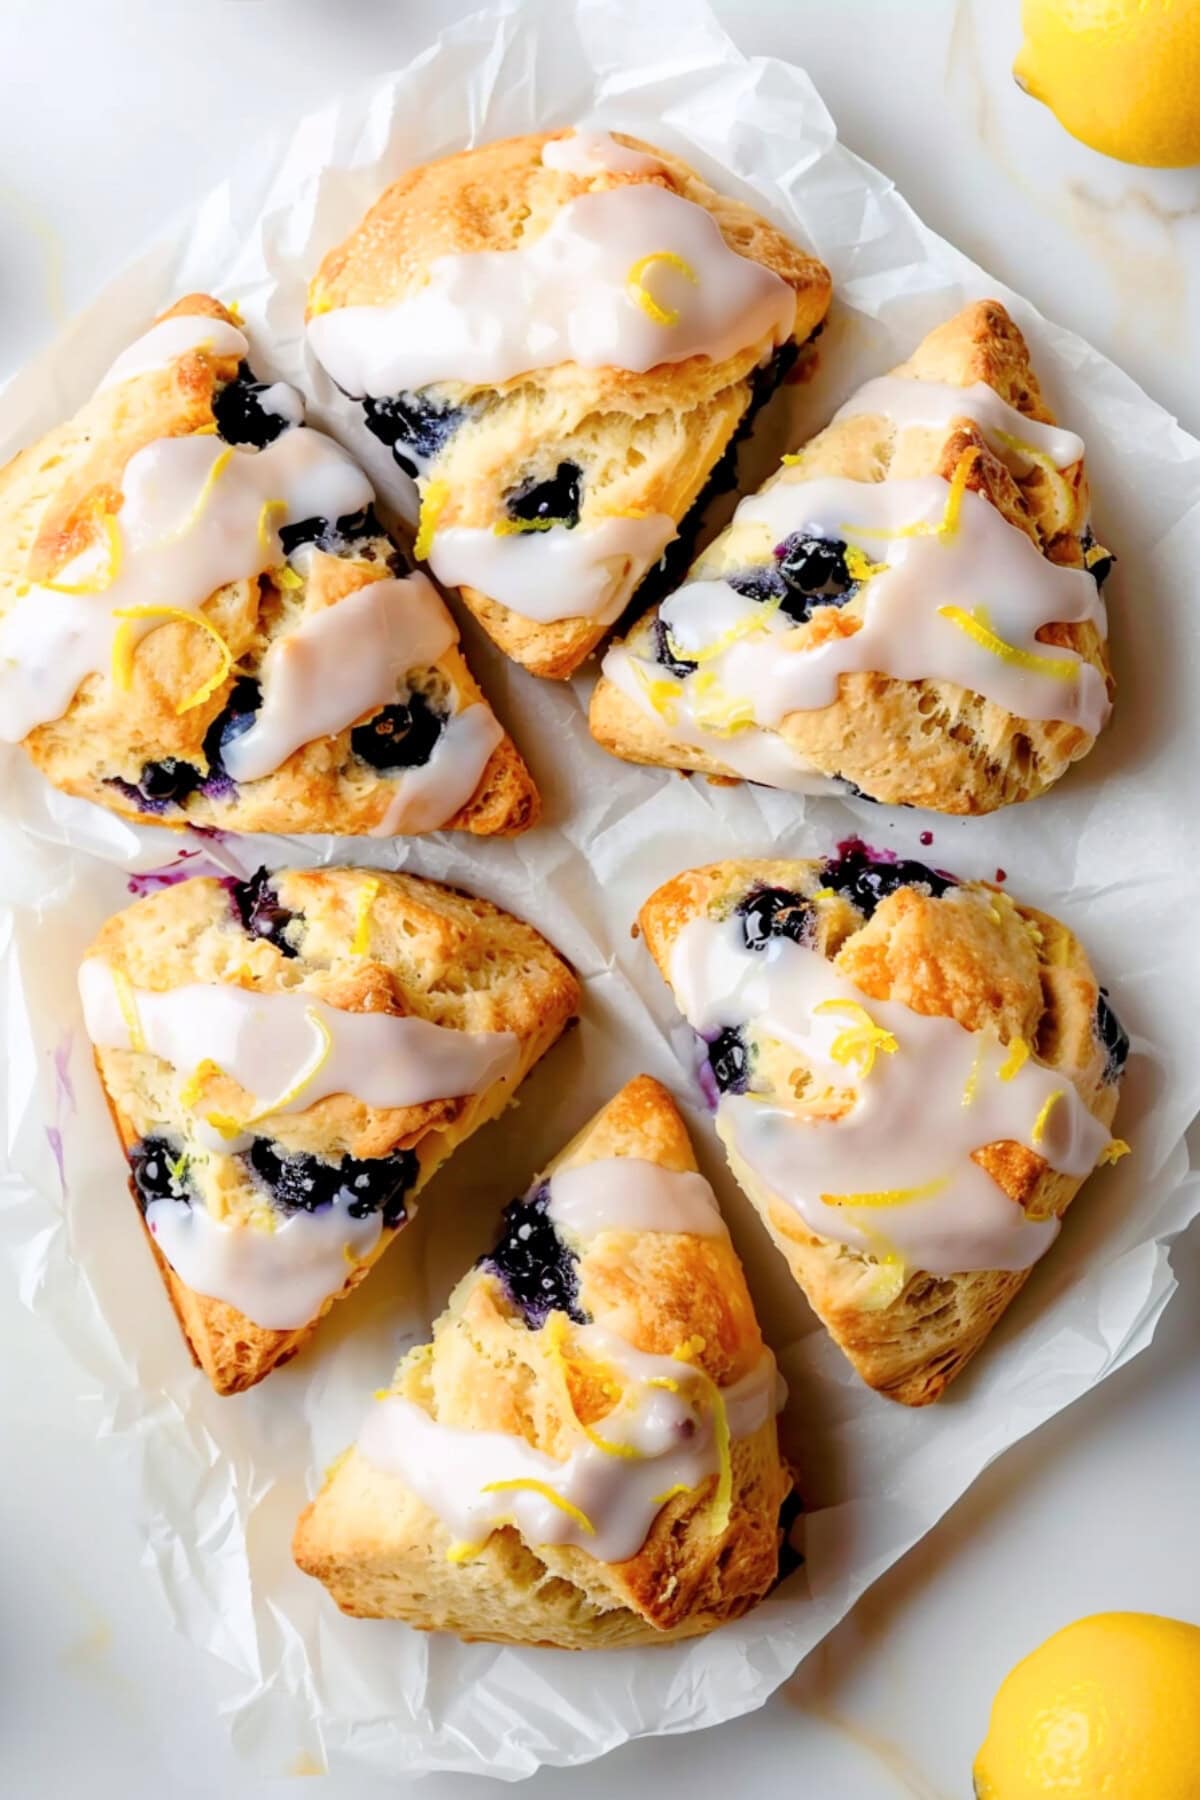 Juicy and flavorful homemade glazed lemon blueberry scones.